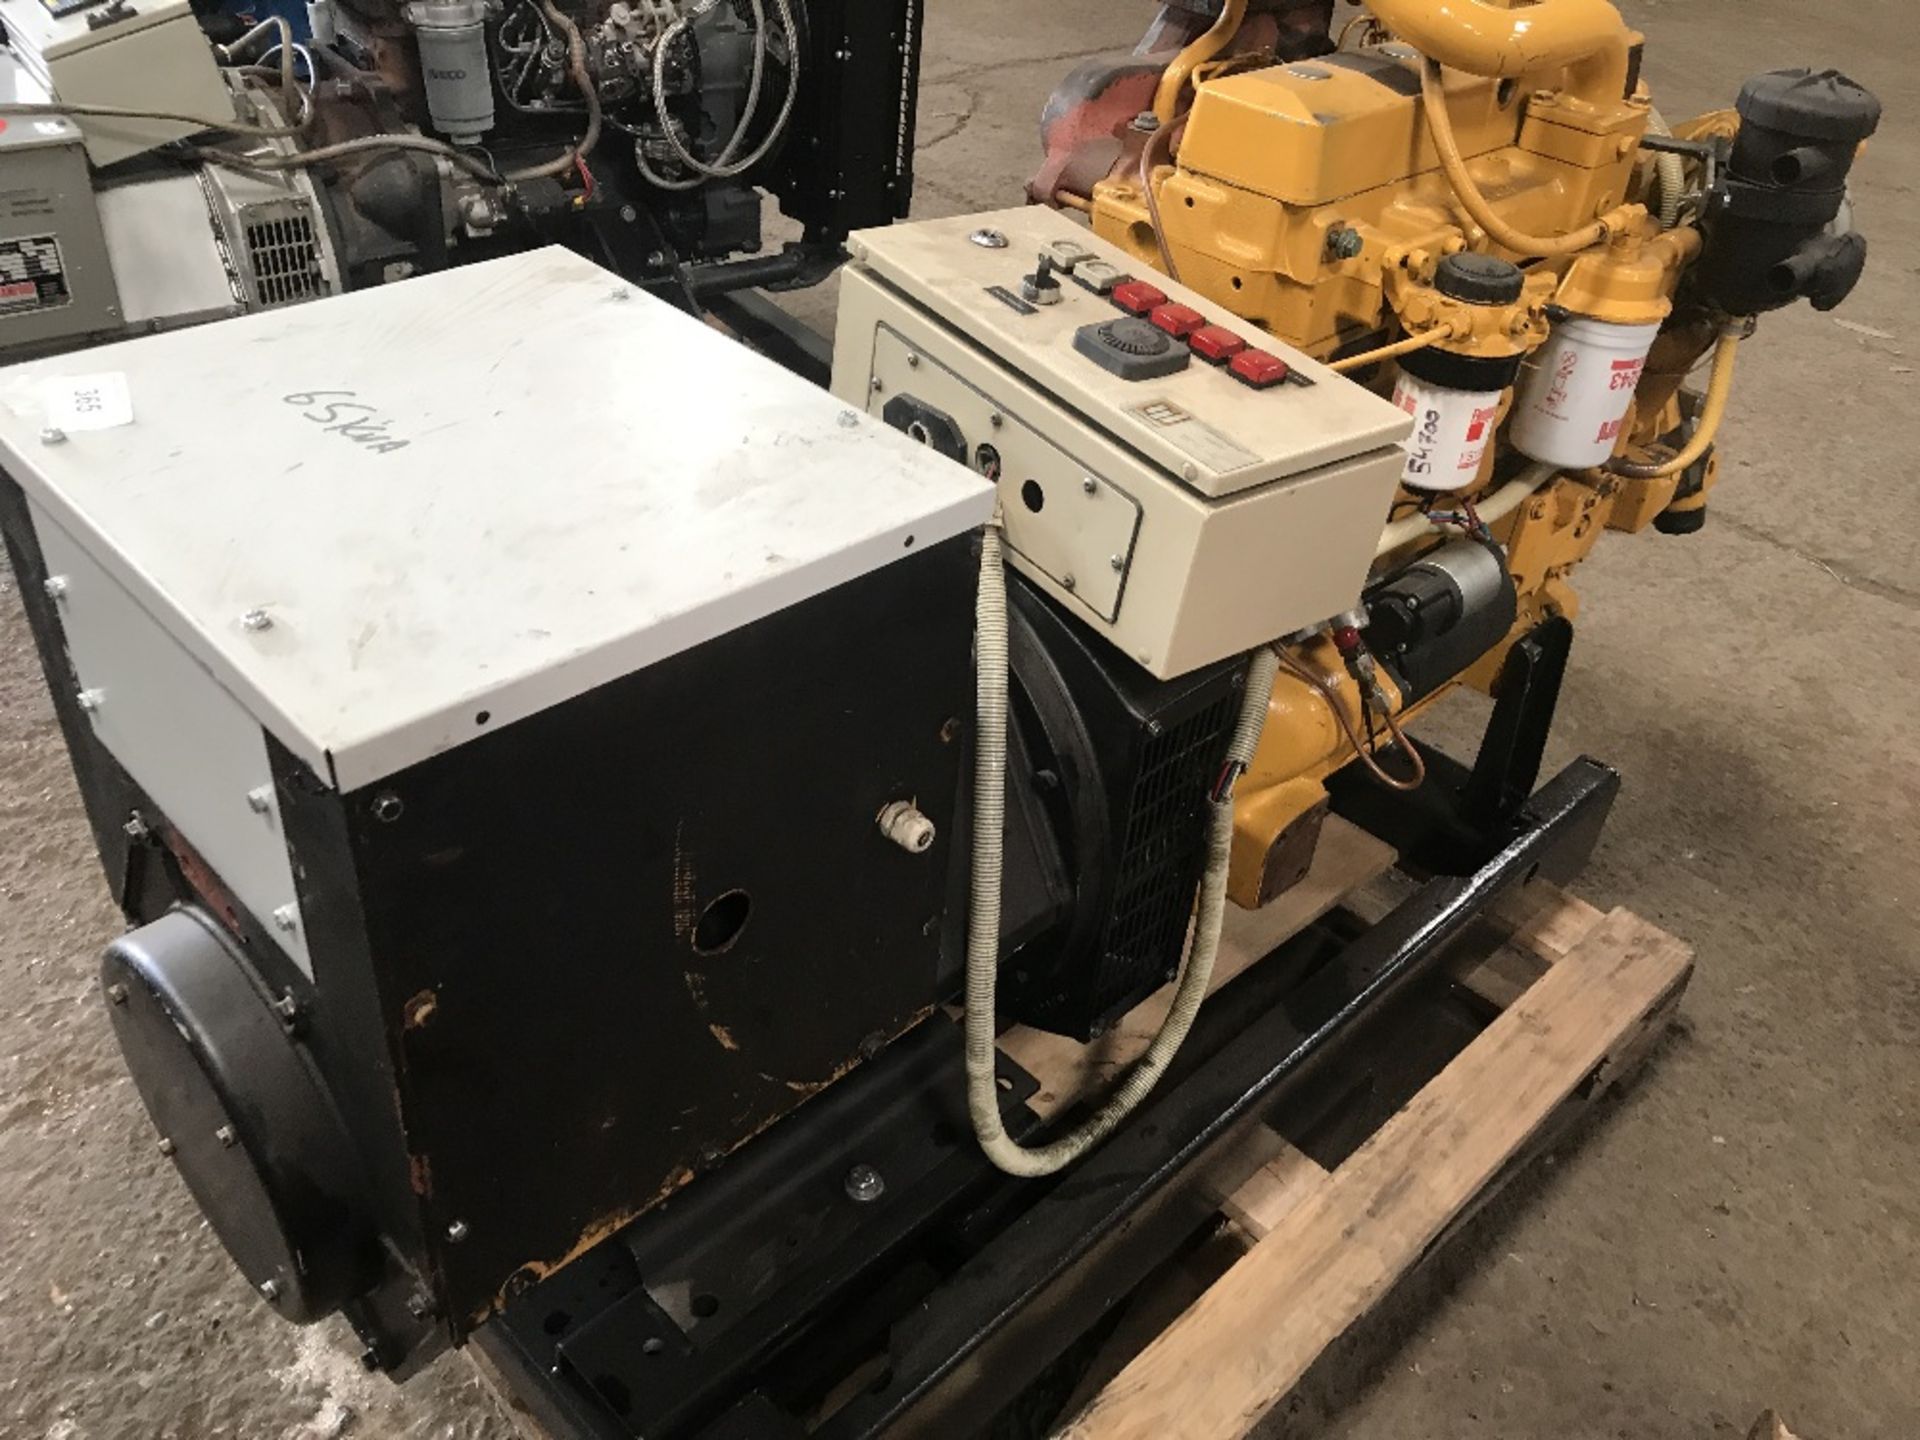 JOHN DEERE 65KVA GENERATOR ON SKID FRAME. RUNNING AND MAKING POWER WHEN RECENTLY REMOVED FROM